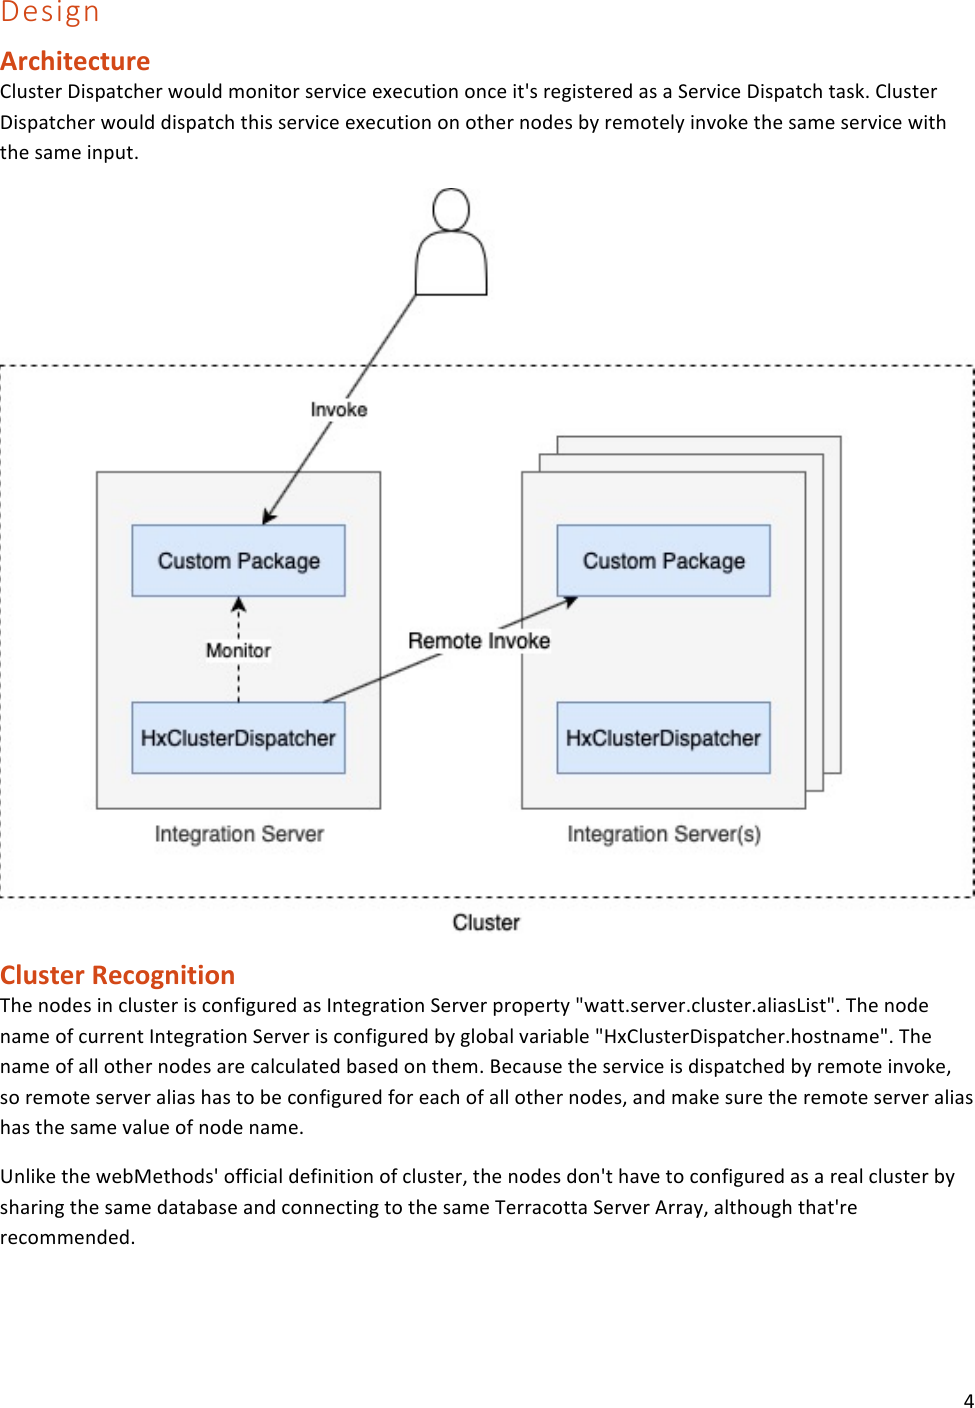 Page 4 of 9 - Hx Cluster Dispatcher-Users'Guide